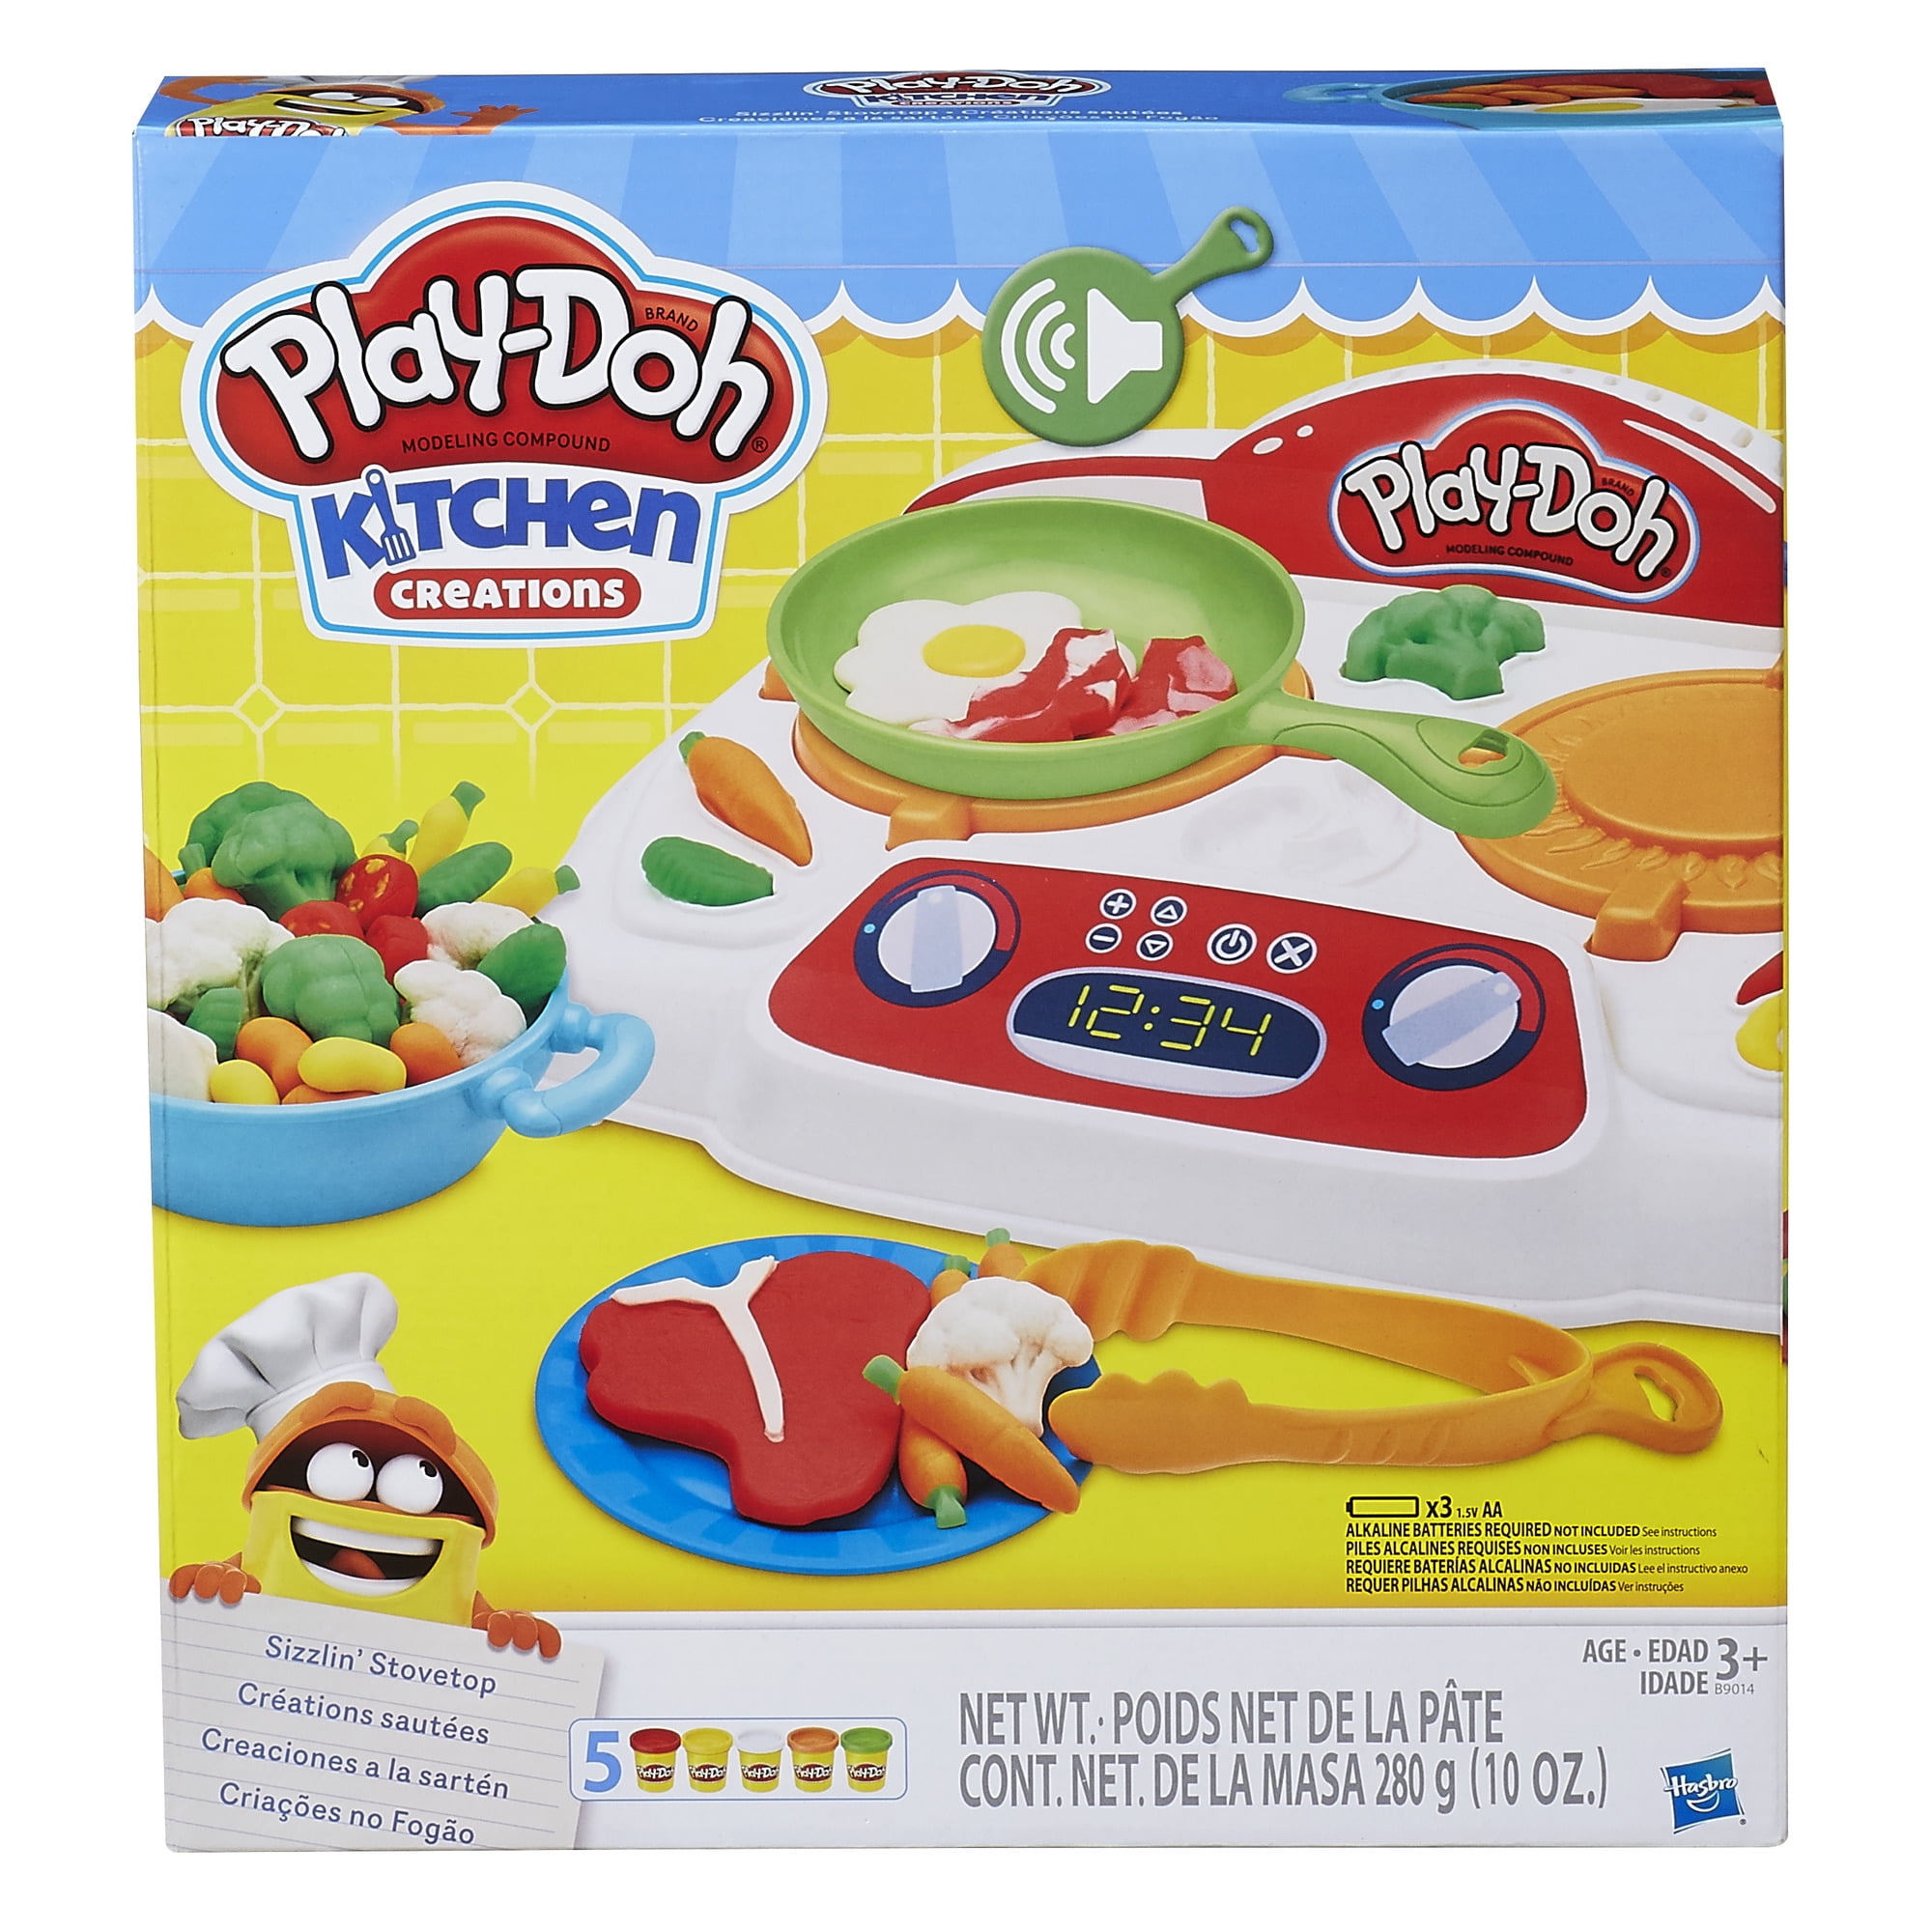  Play  Doh  Kitchen  Creations Sizzlin Stovetop Food Set  with 